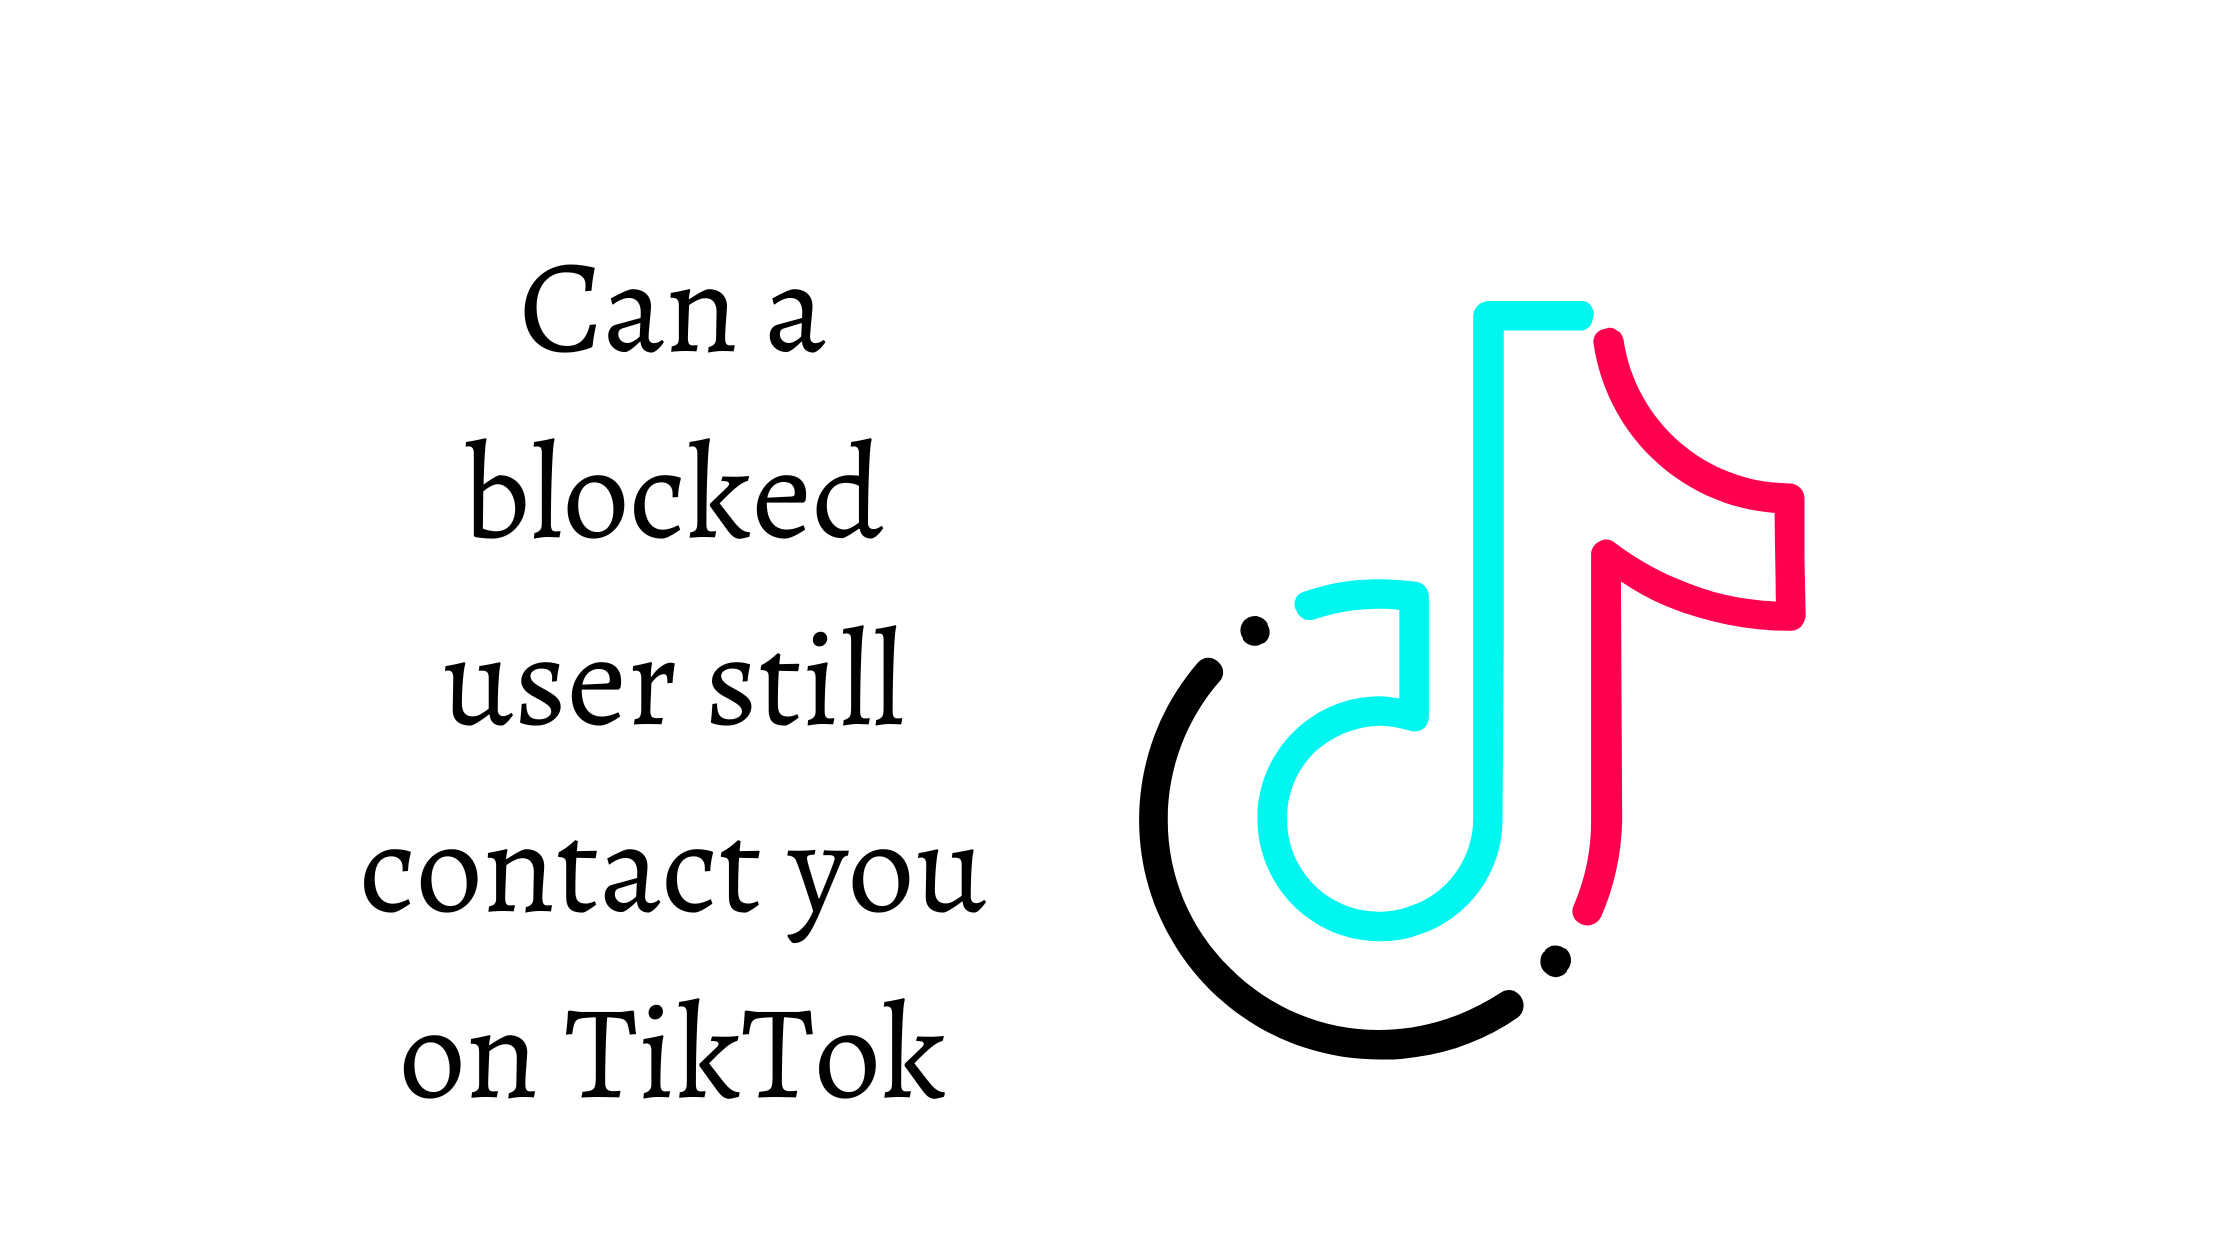 Can a blocked user still contact you on TikTok